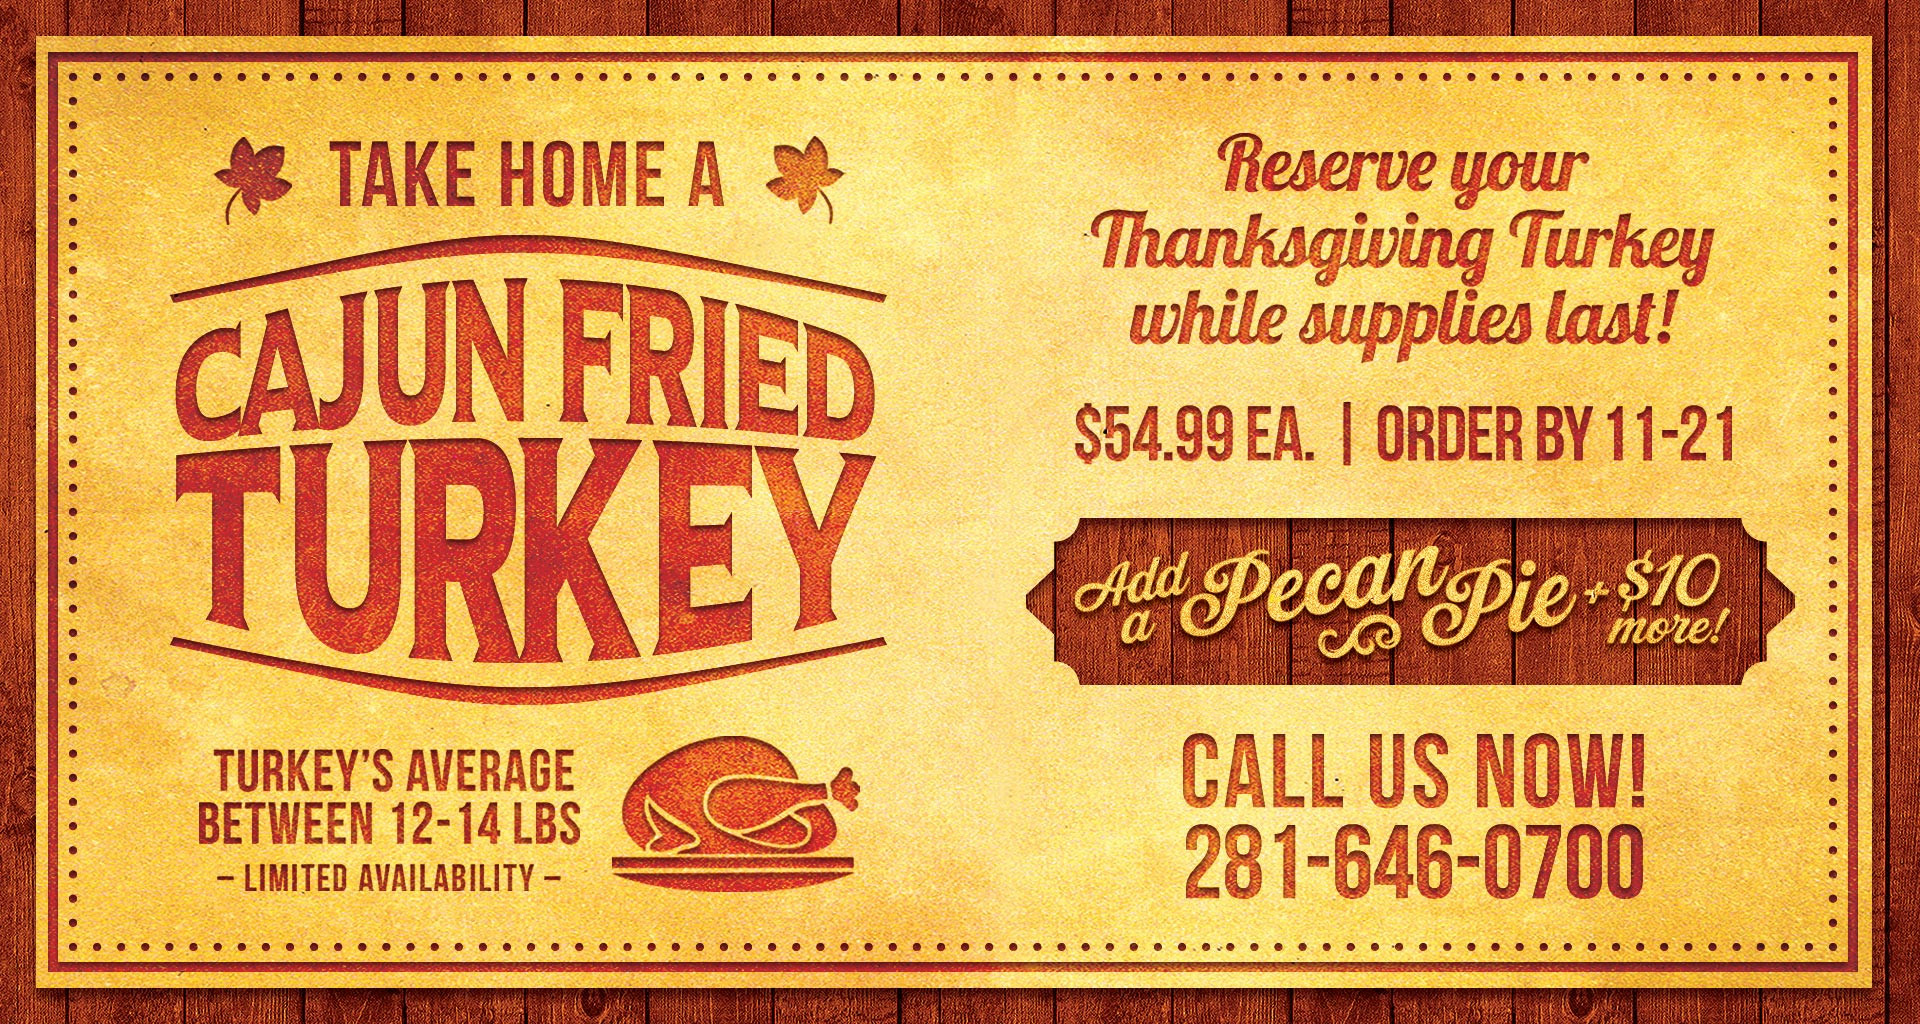 Order Fried Turkey For Thanksgiving
 Take Home a Cajun Fried Turkey Orleans Seafood Kitchen